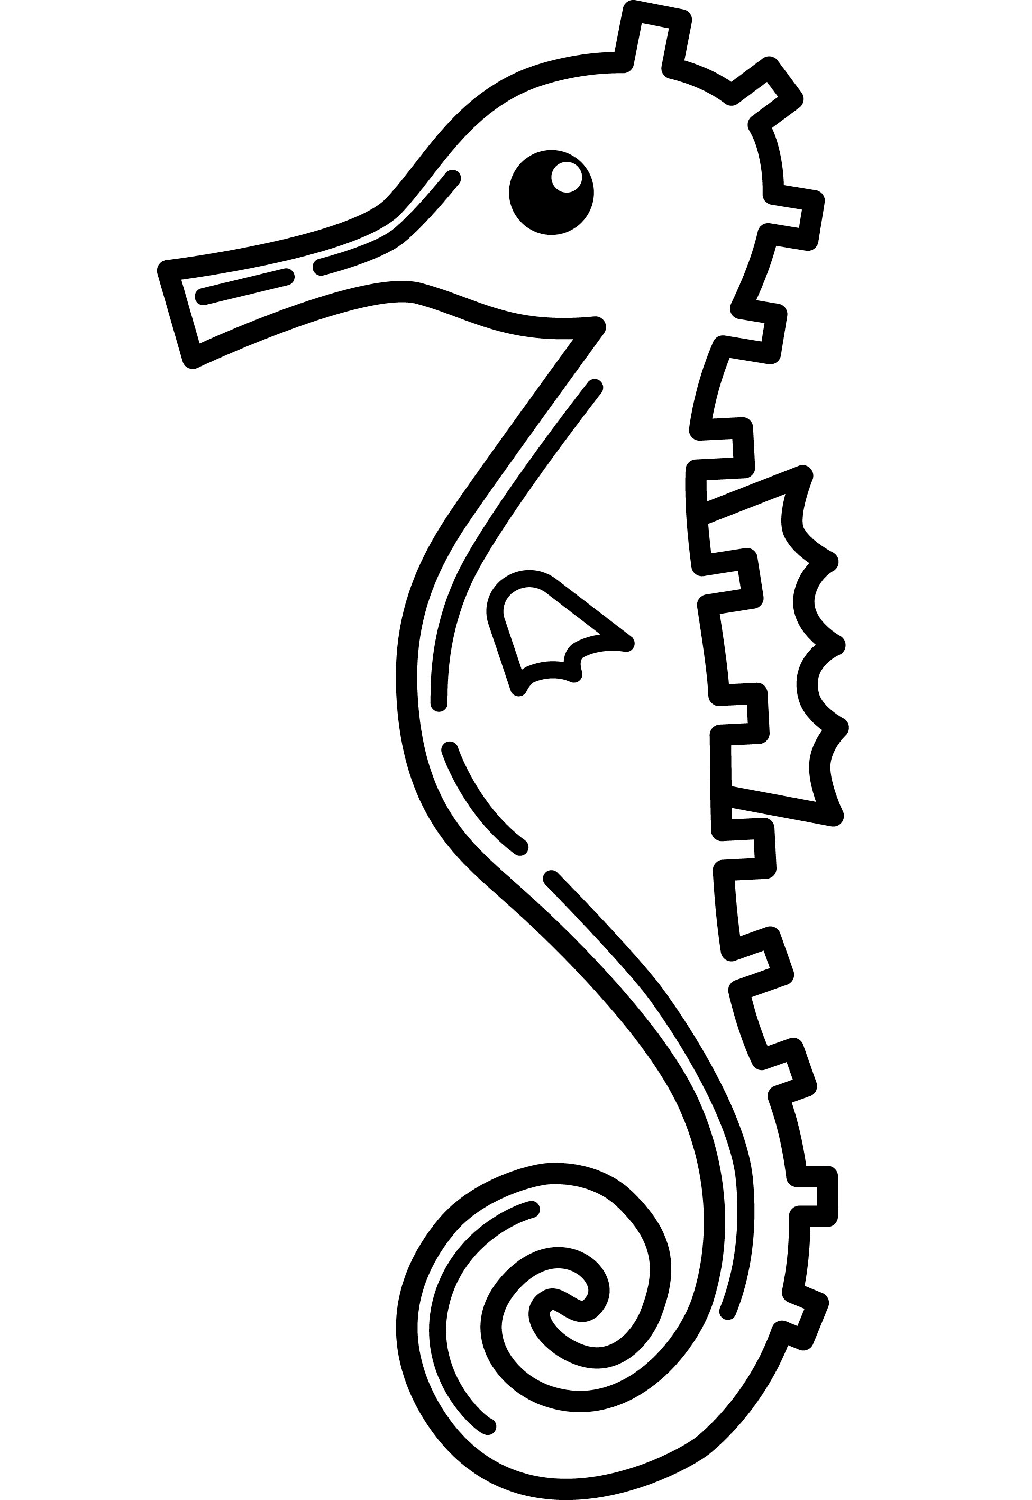 Seahorse coloring page - ColouringPages